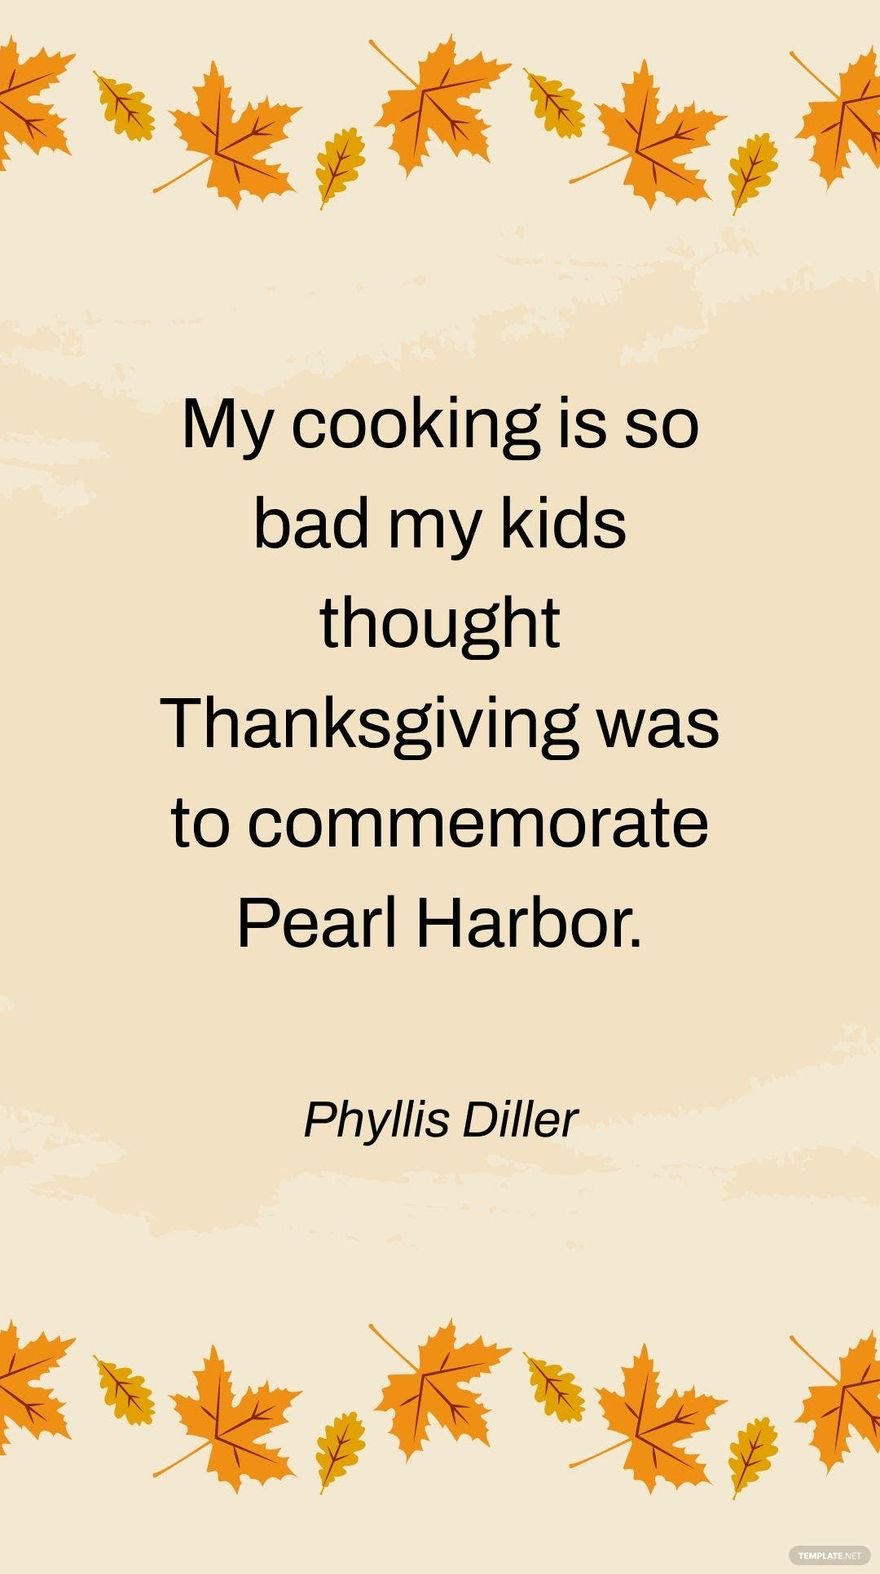 Free Phyllis Diller - My cooking is so bad my kids thought Thanksgiving was to commemorate Pearl Harbor.